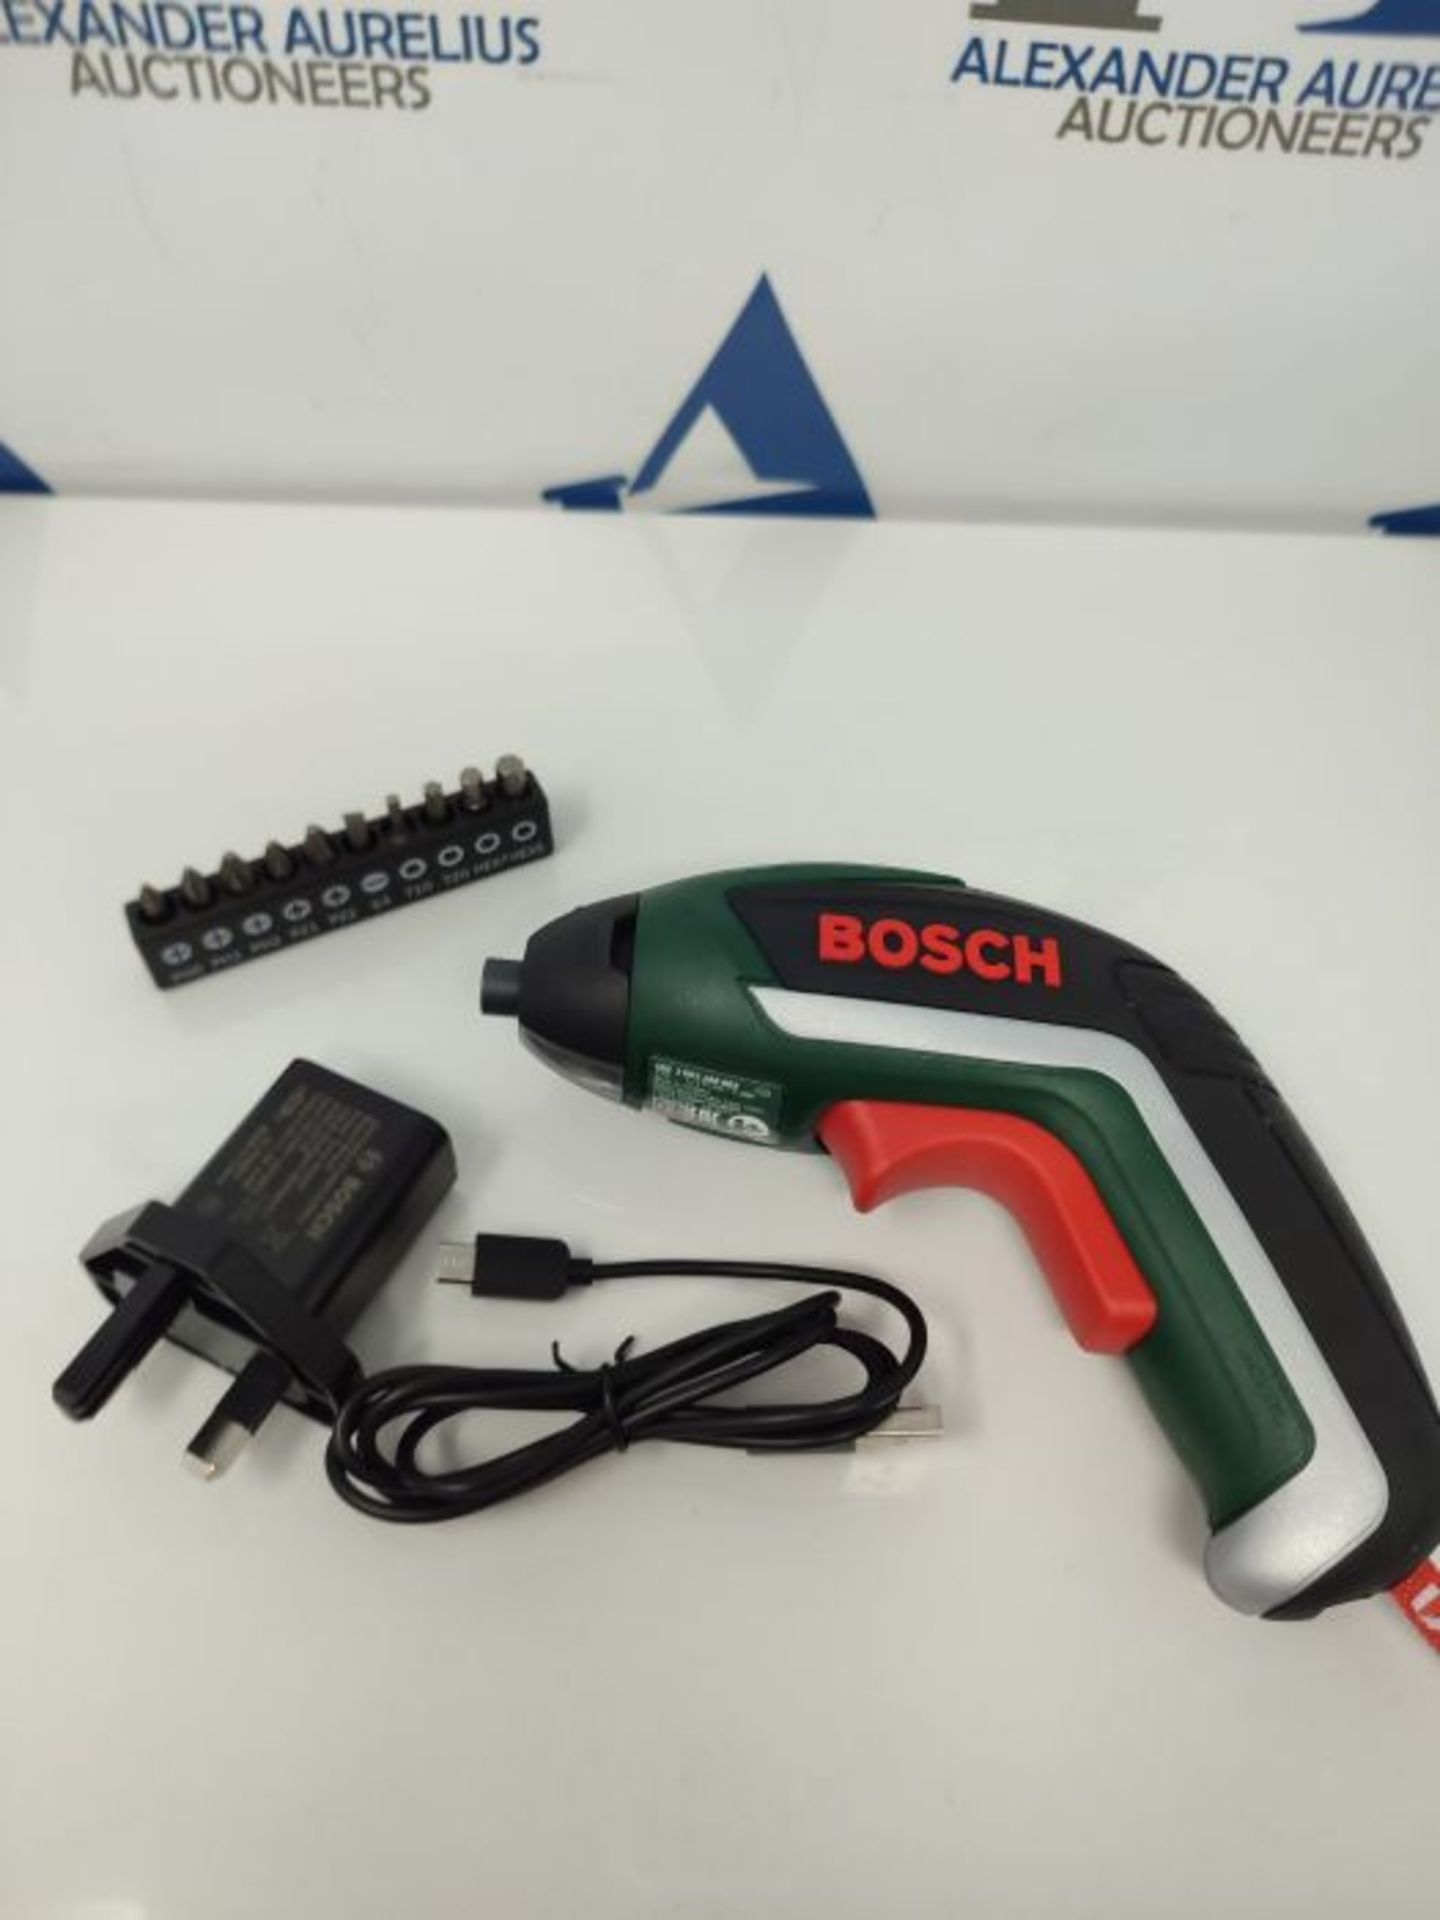 Bosch Home and Garden Cordless Screwdriver IXO (5th generation, 3.6 V, in case) - Image 3 of 3